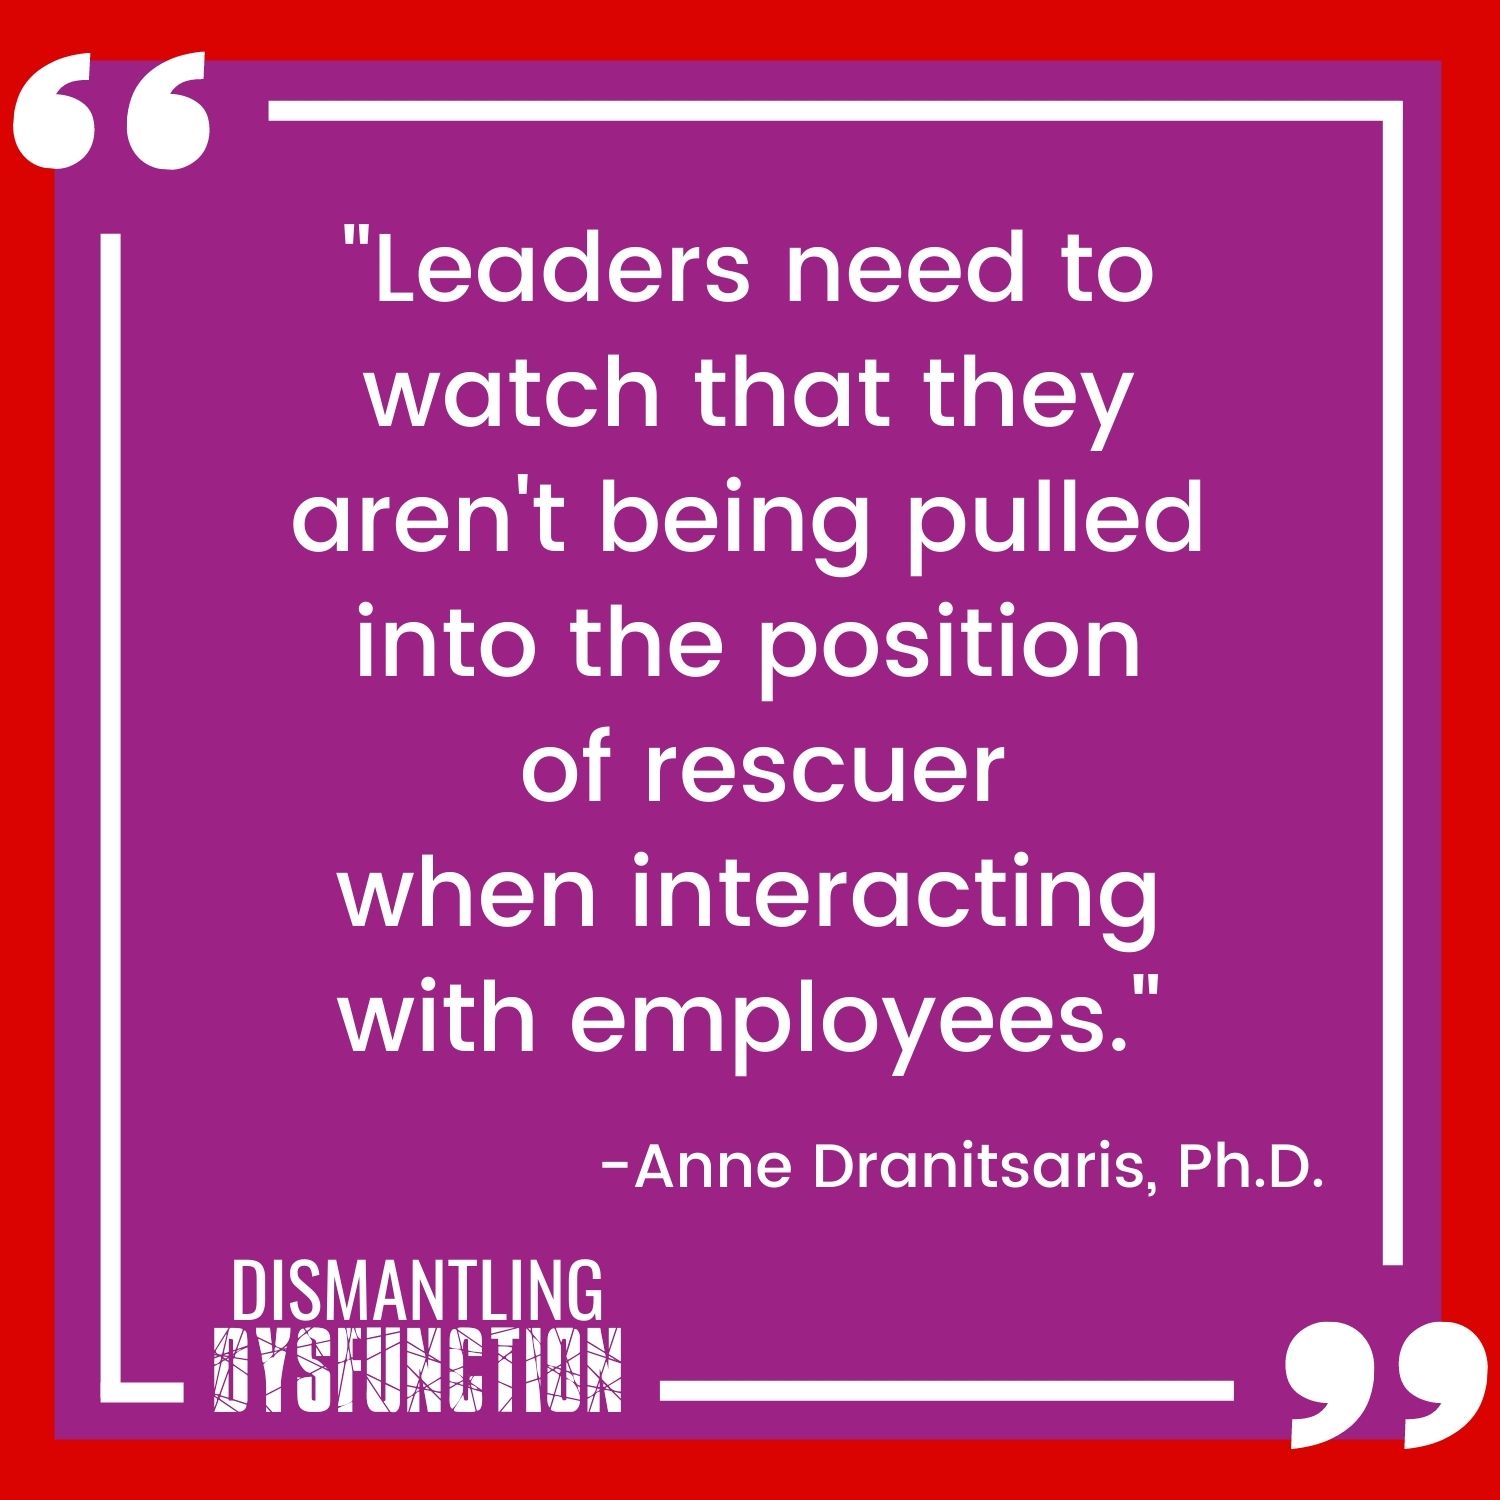 episode 18 - quote tile 4 - "Leaders need to watch that they aren't being pulled into the position  of rescuer when interacting with employees."